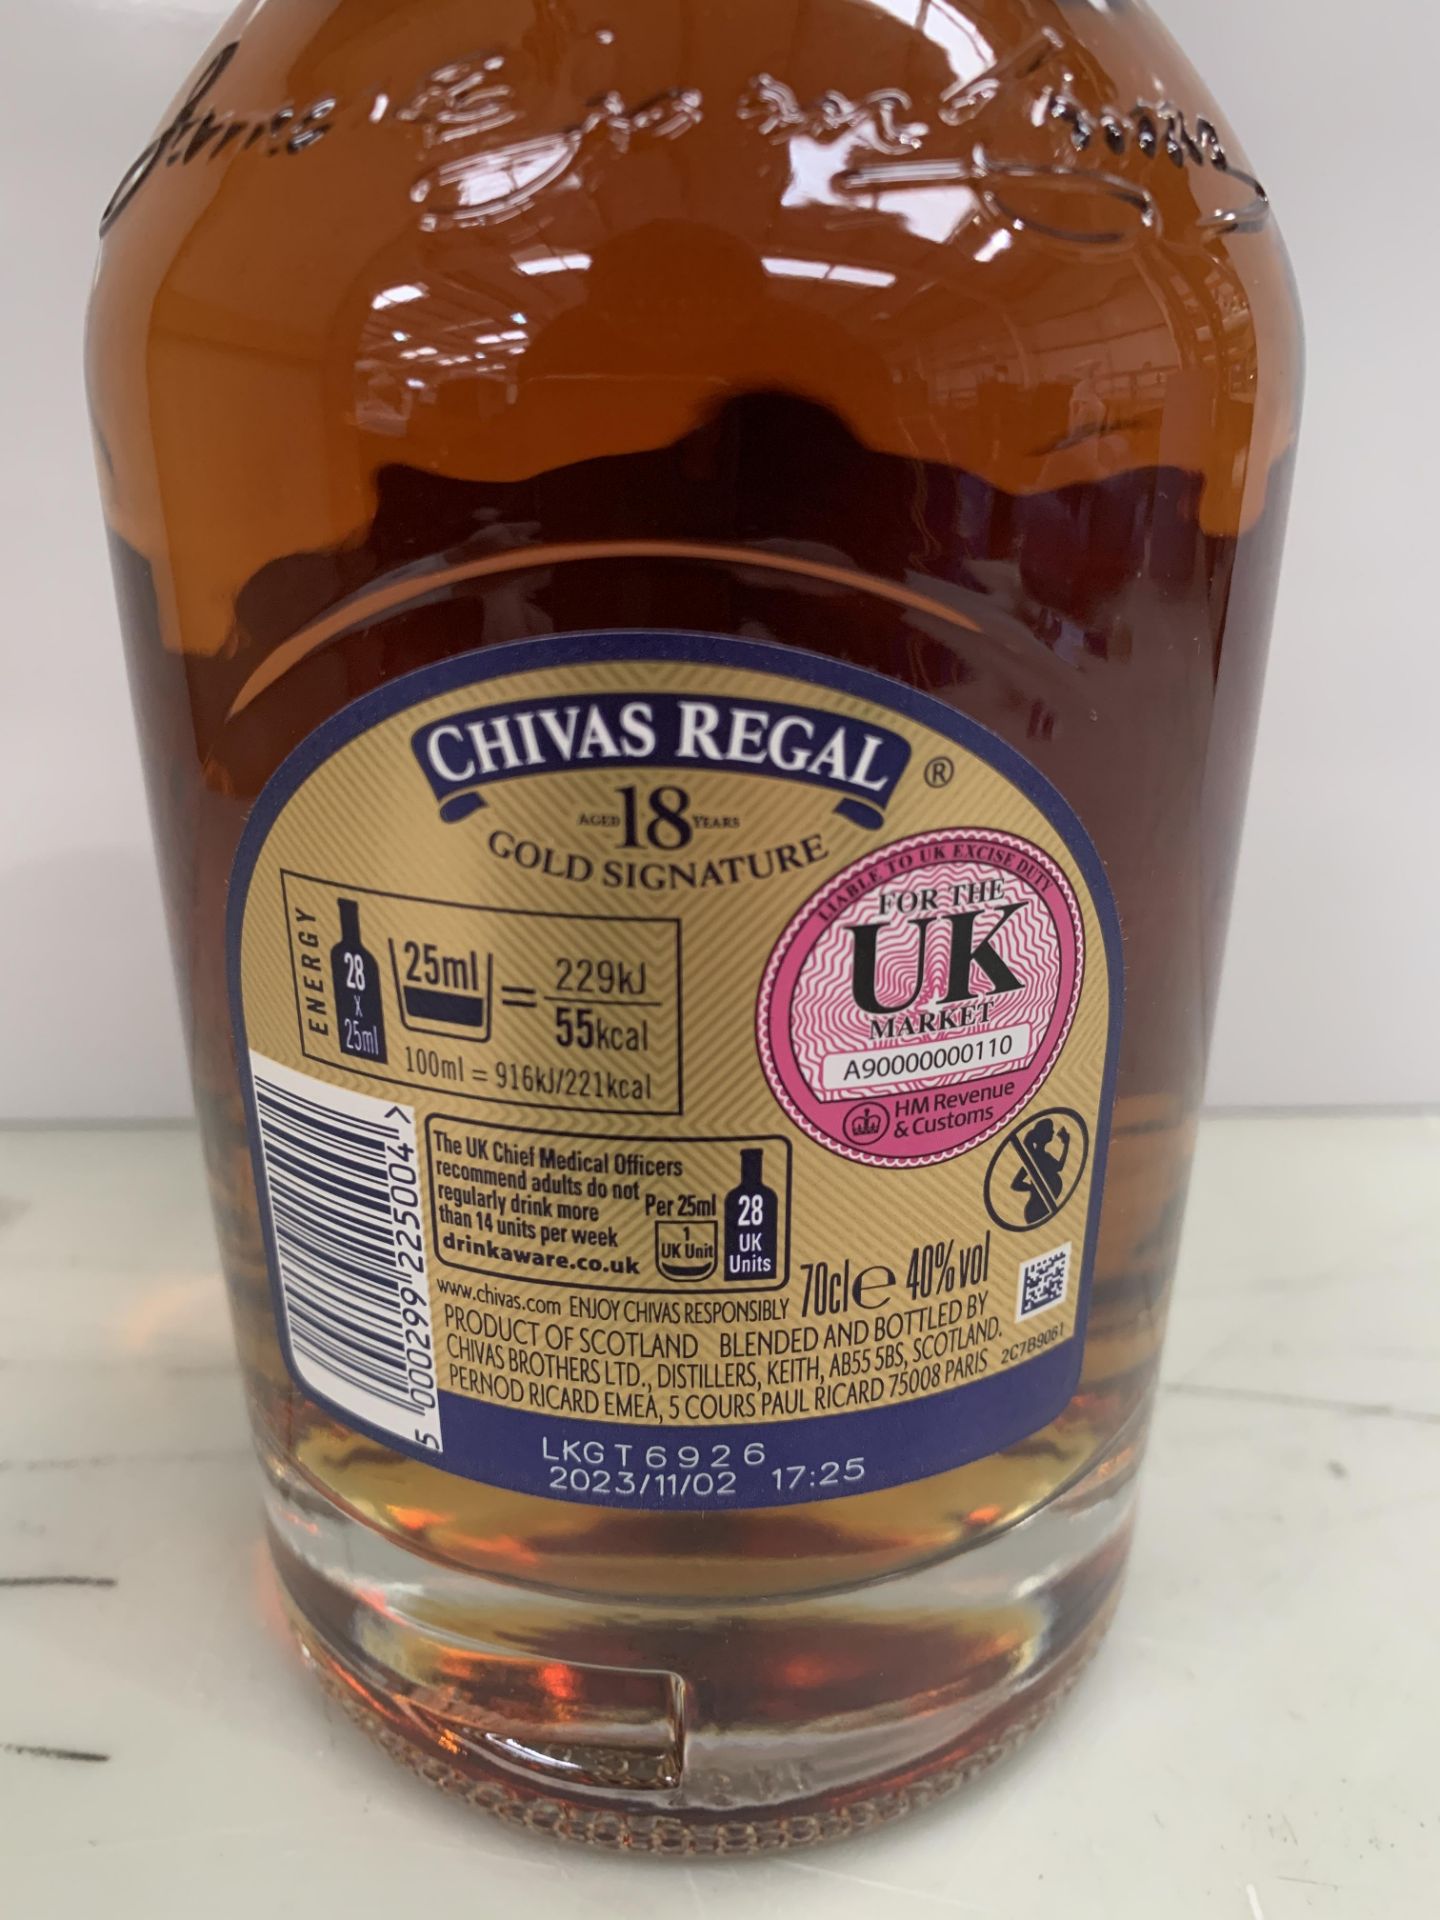 A Bottle of Chivas Regal Eighteen Year Aged Gold Signature Whisky 70cl 40% - Image 3 of 3